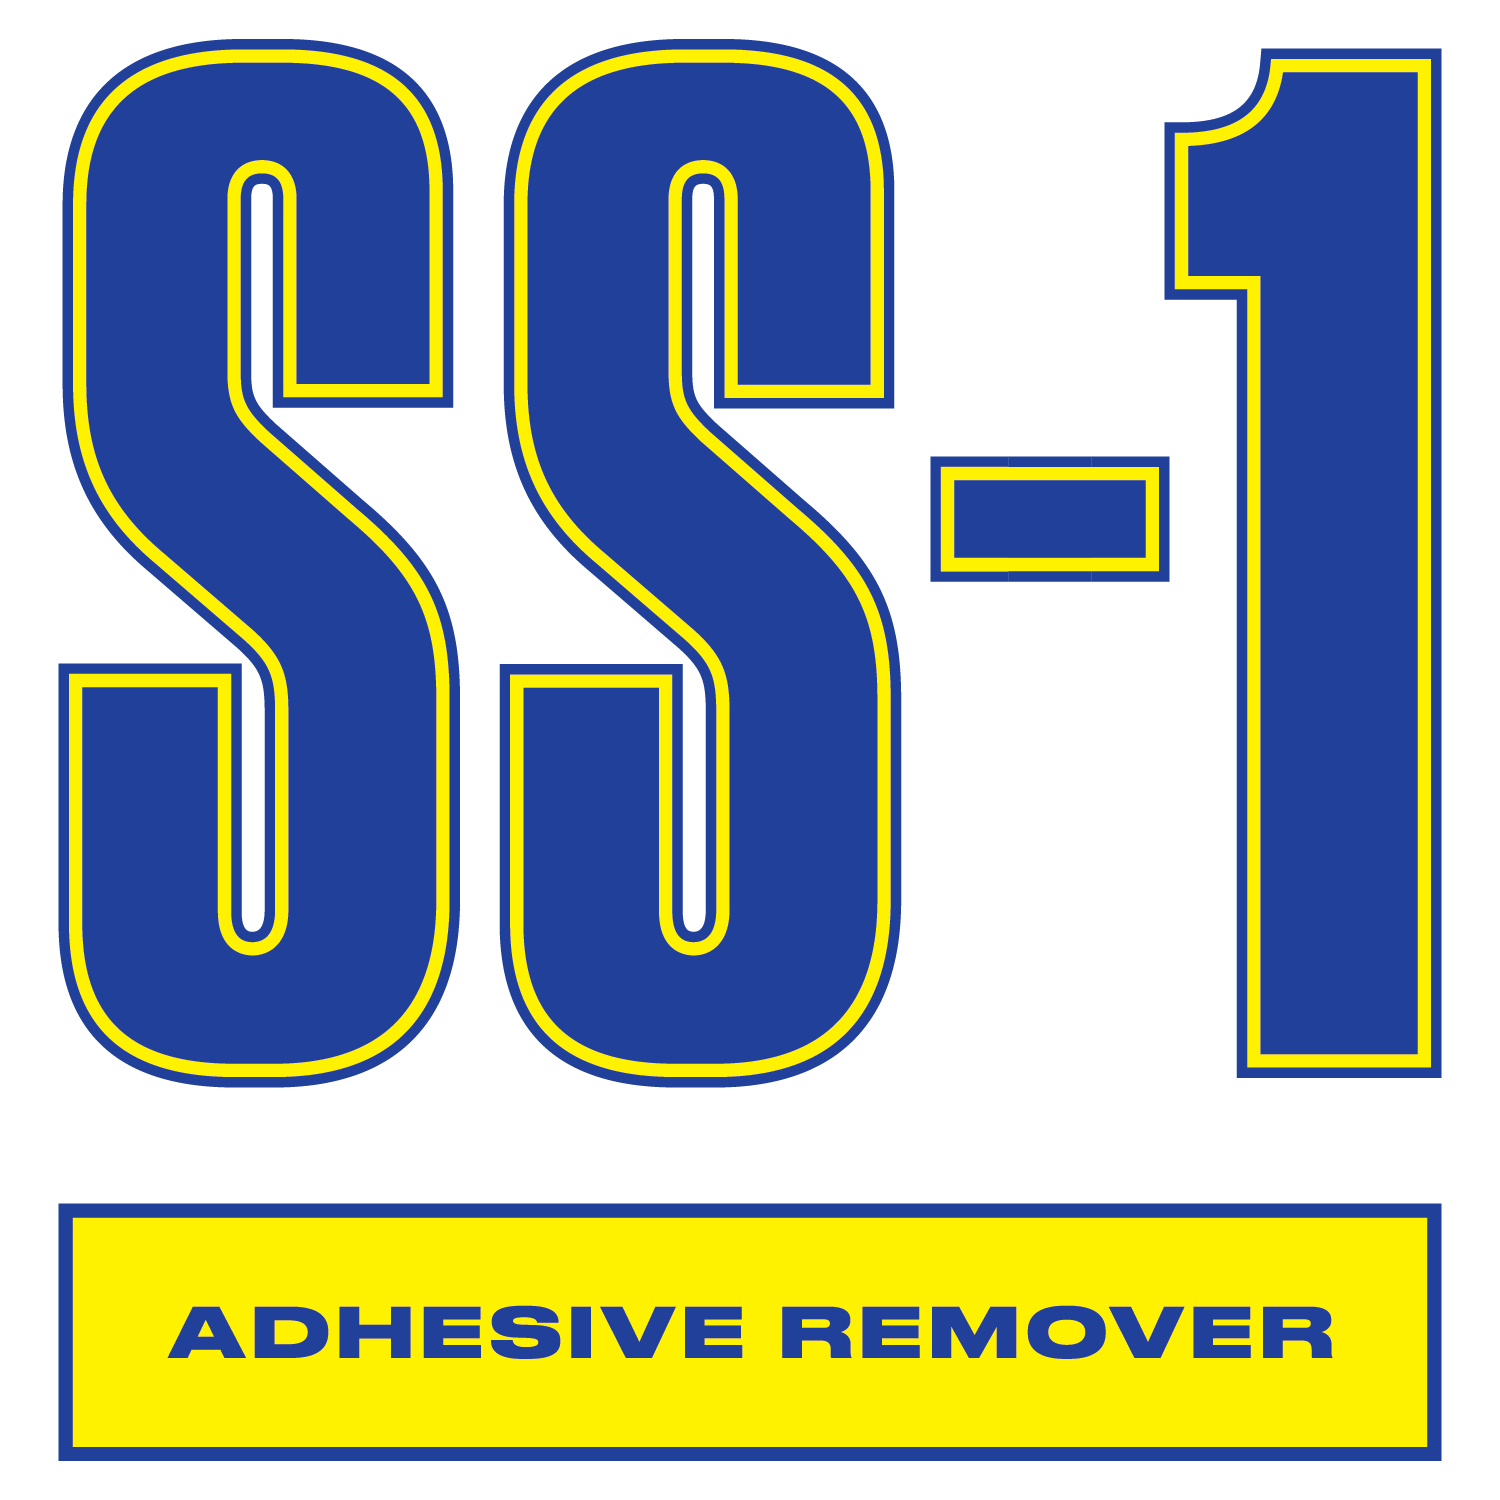 SS1 Adhesive Remover